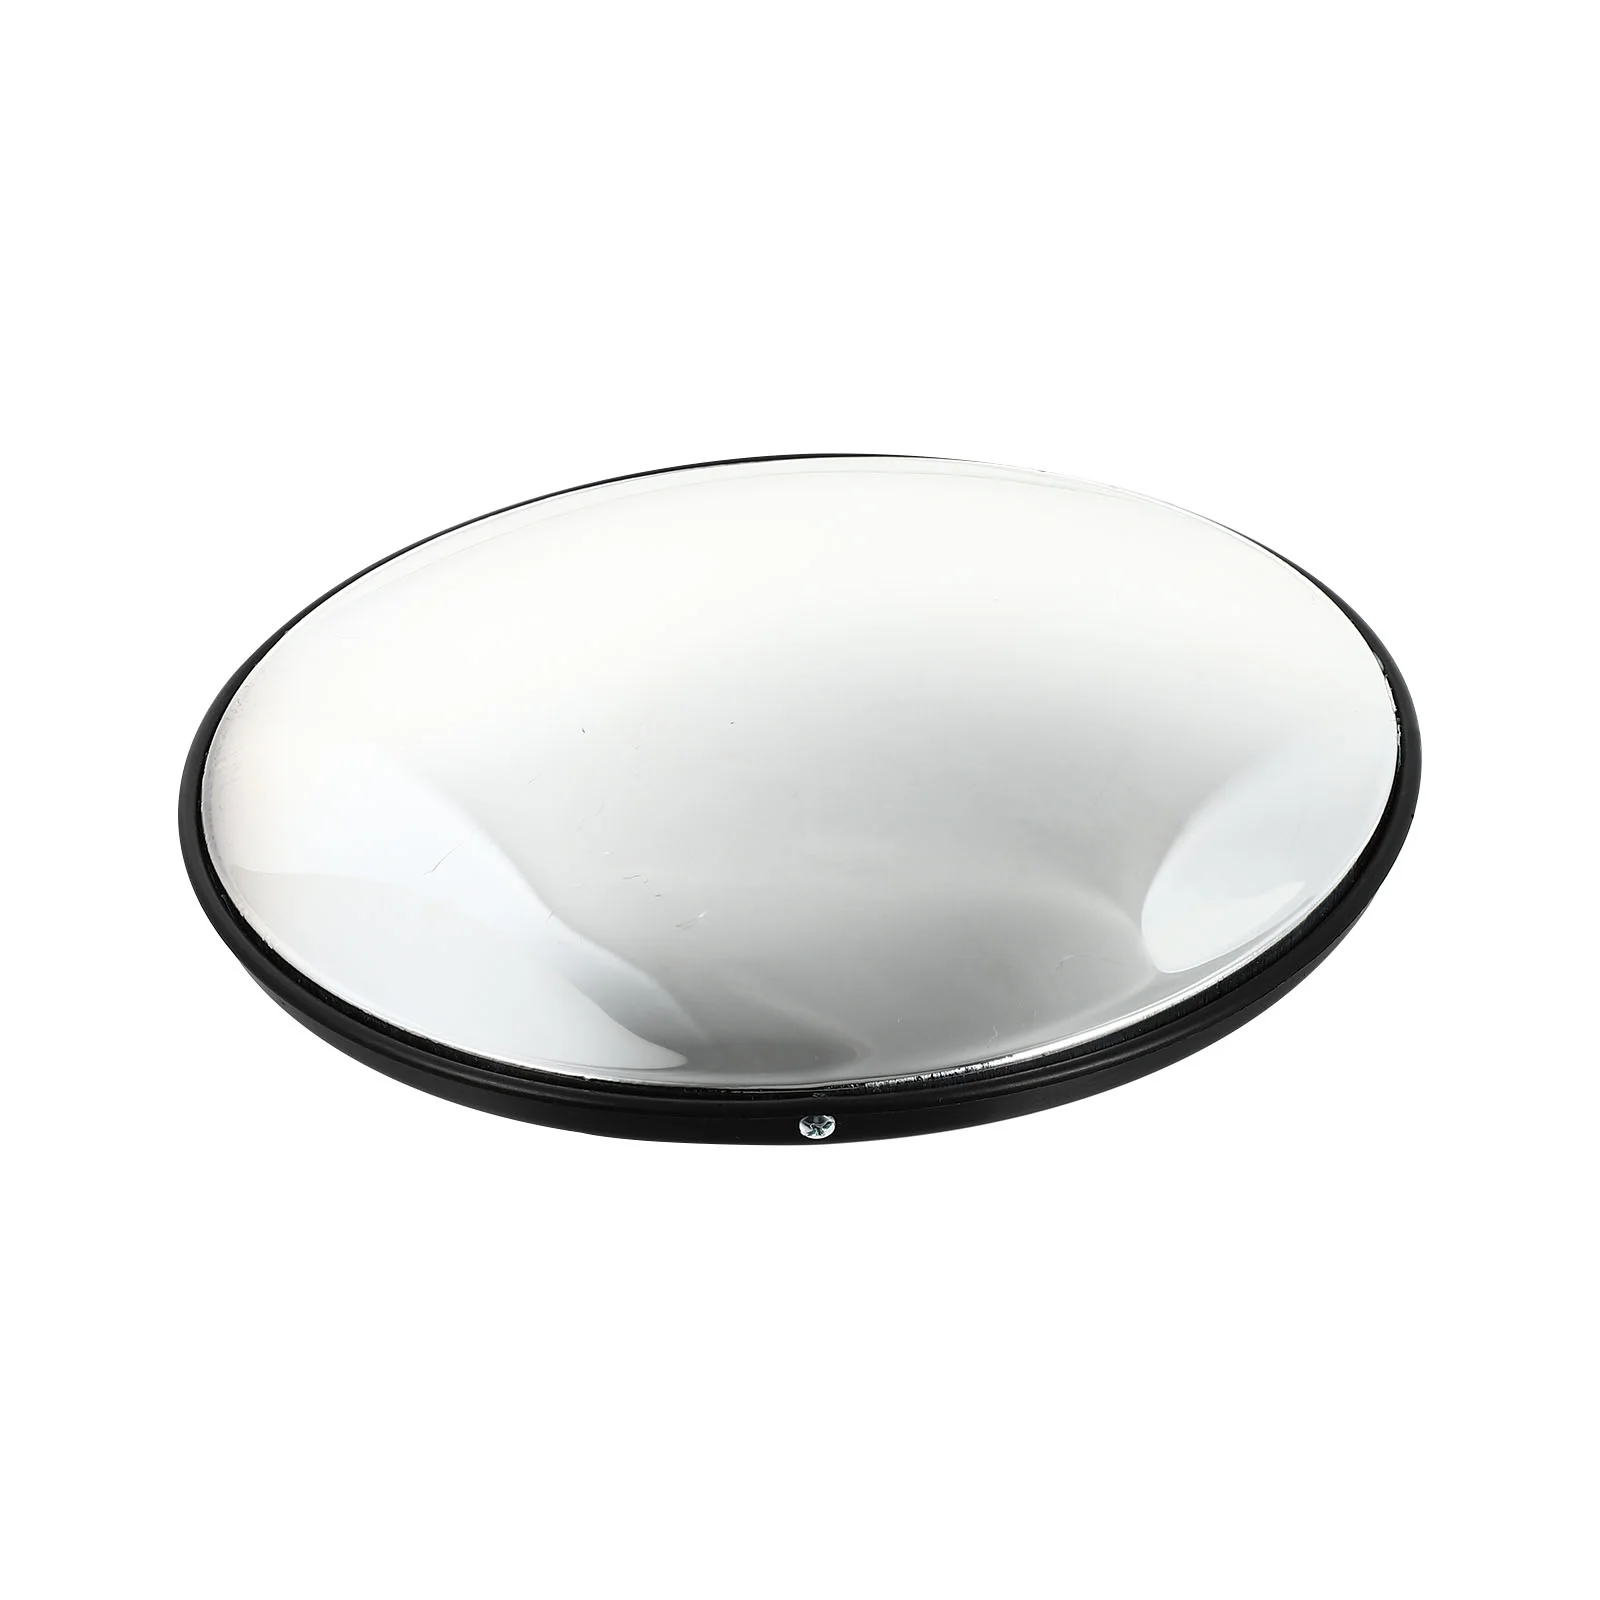 

Traffic Corner Mirror Circle Mirrors Wide Angle Convex Wide-angle Lens Outdoor Roadway Pp Panoramic Surveillance